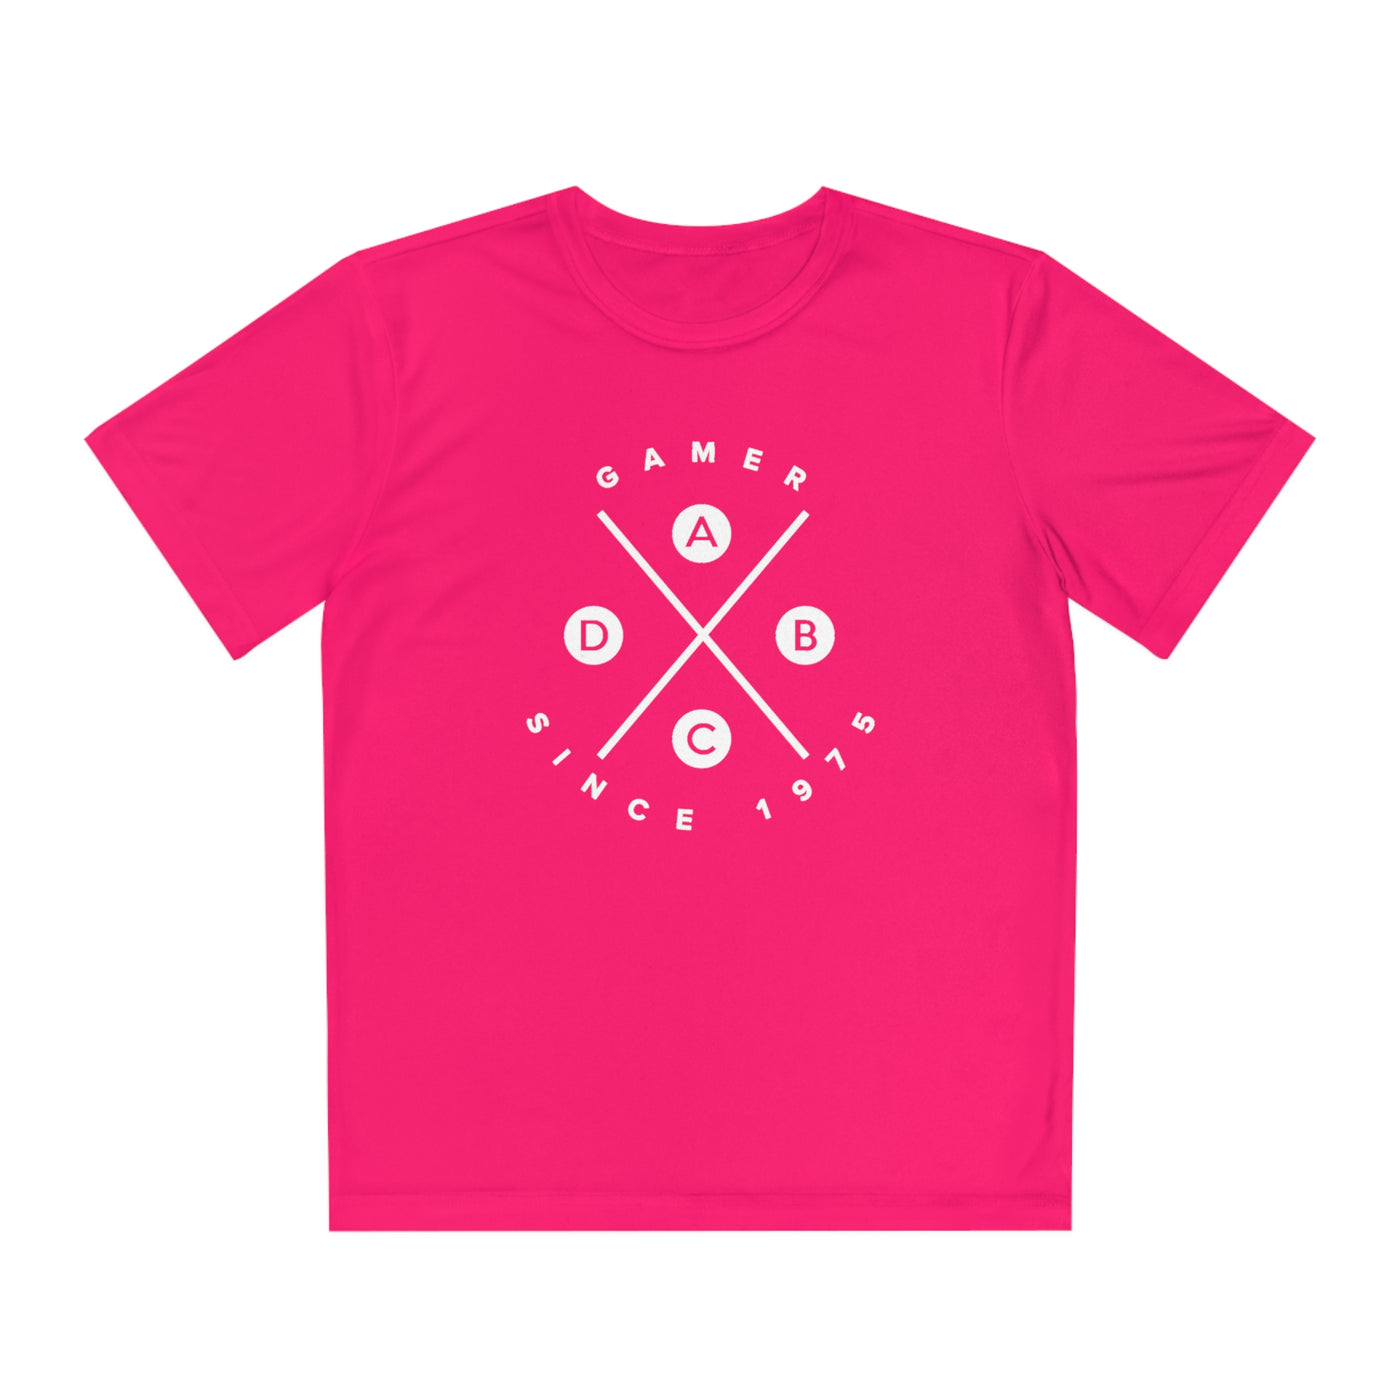 Gamer Fresh | Pivot Now | E-sports | Team Youth Competitor | Various colors T-Shirt